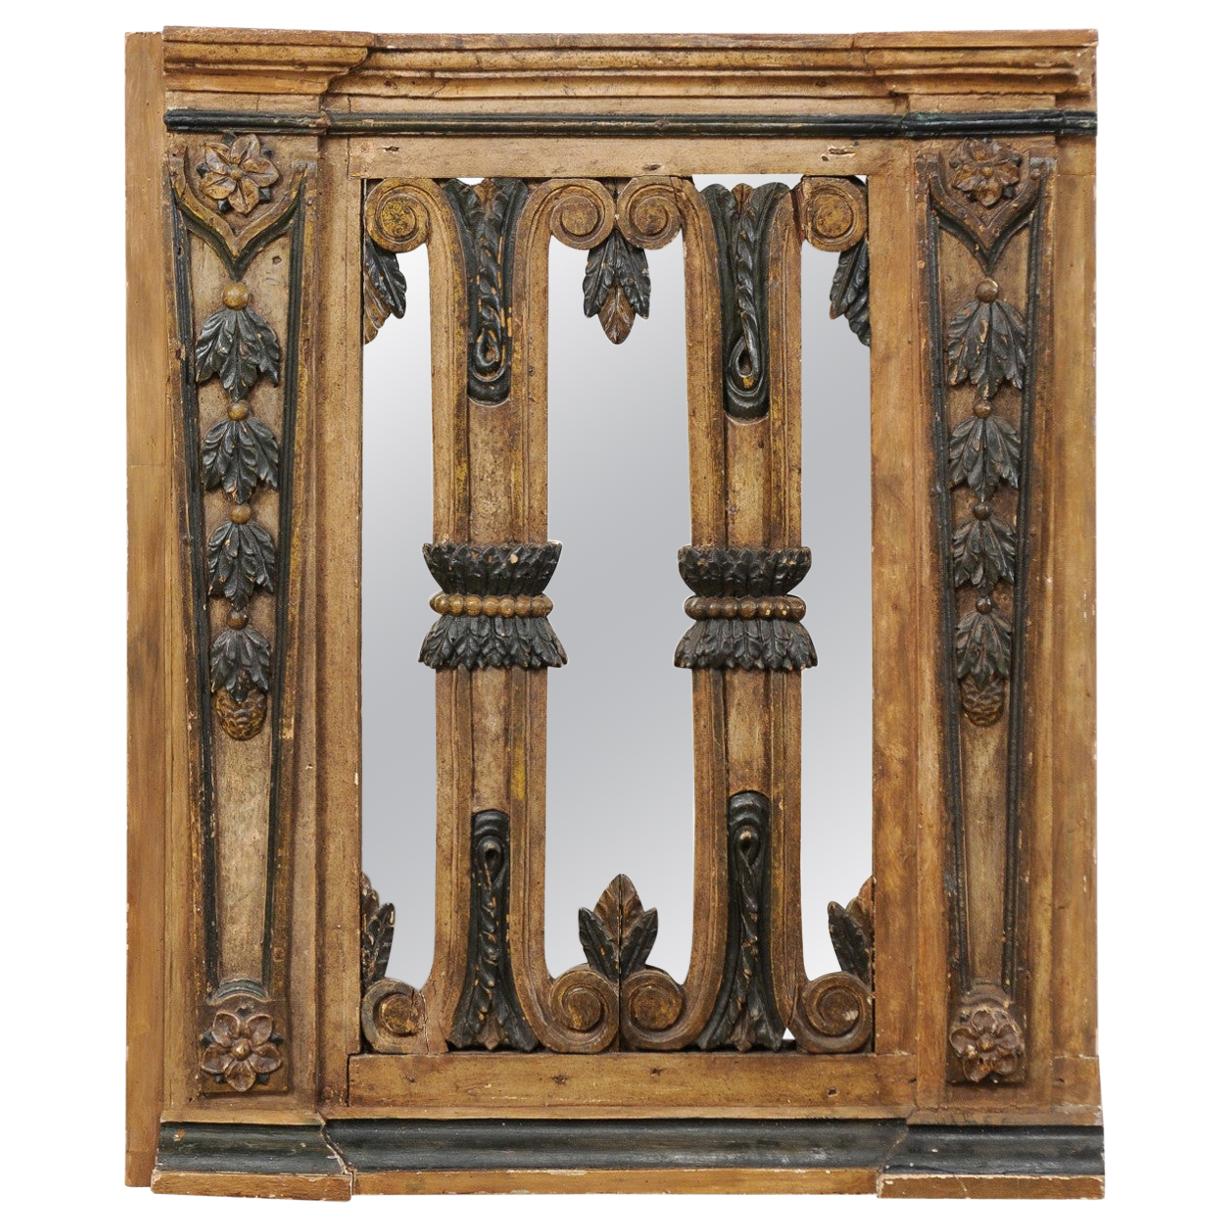 Early 19th Century Portuguese Carved Wood Gate with Mirror at Backside